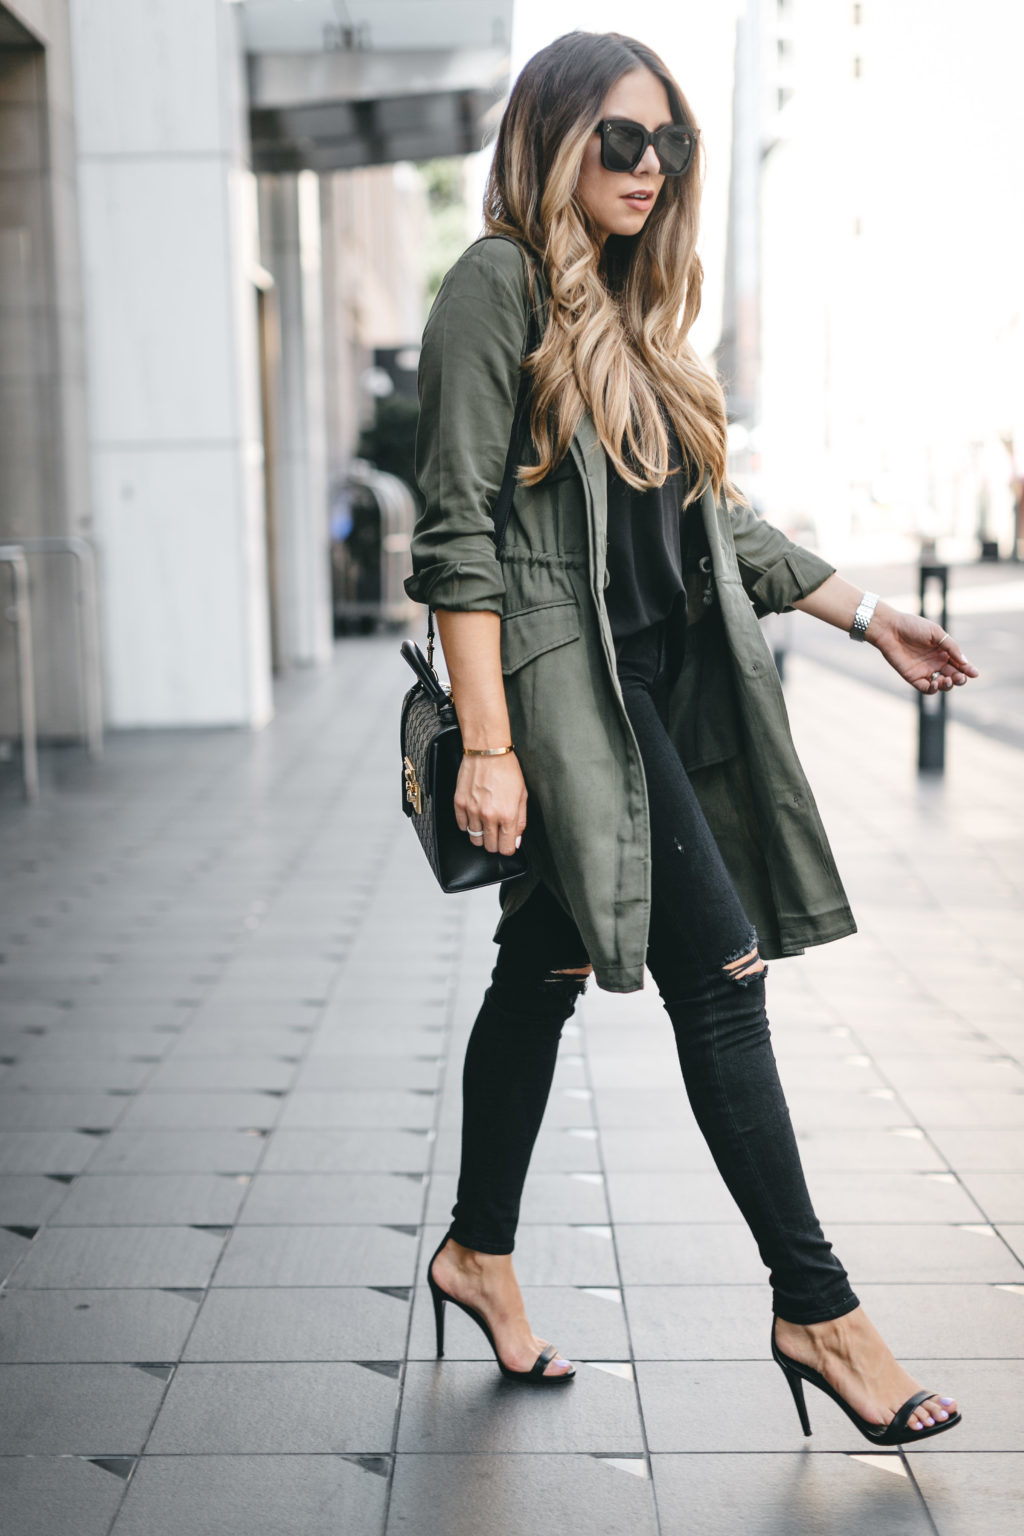 green jacket outfit